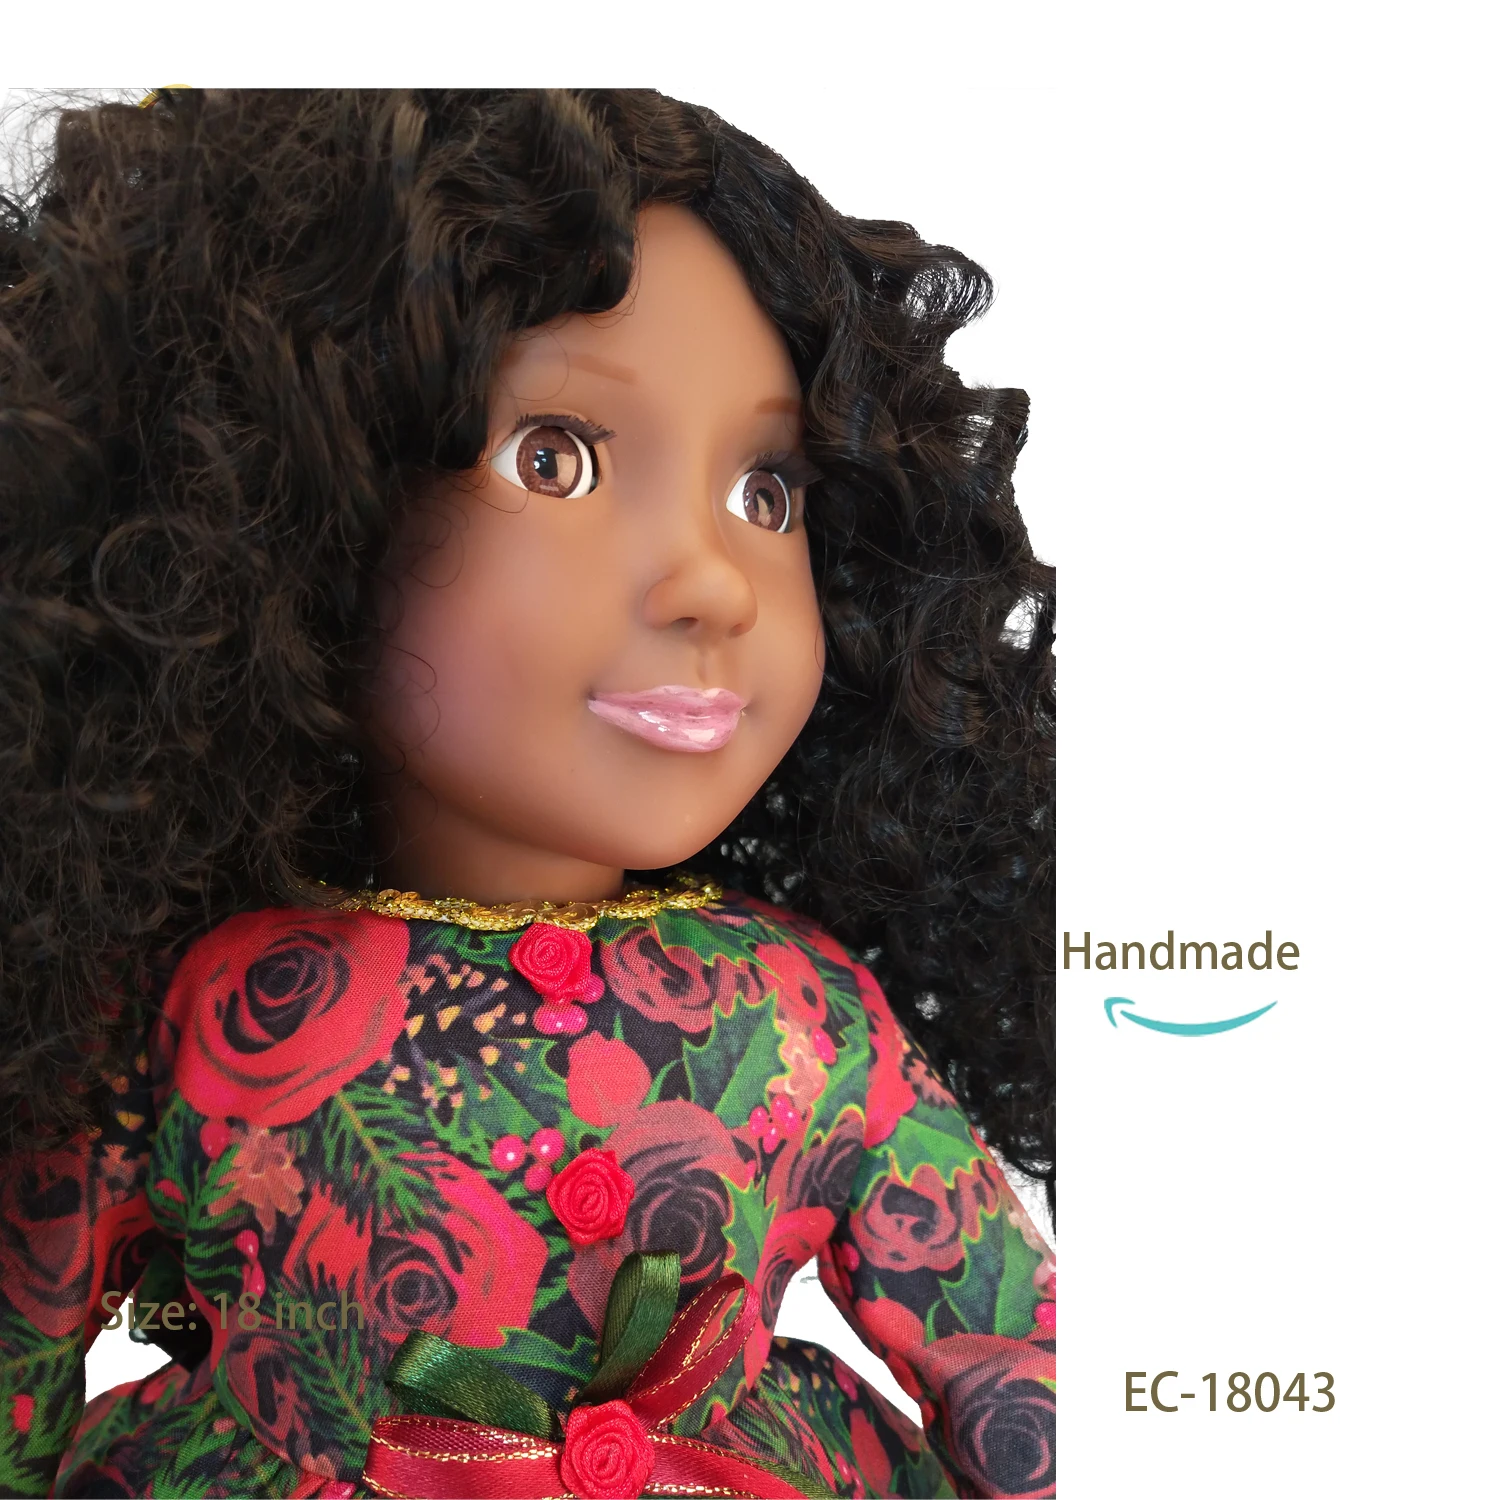 2020 Hot Sale Popular 18 Inch Vinyl American Girl Doll Clothes African